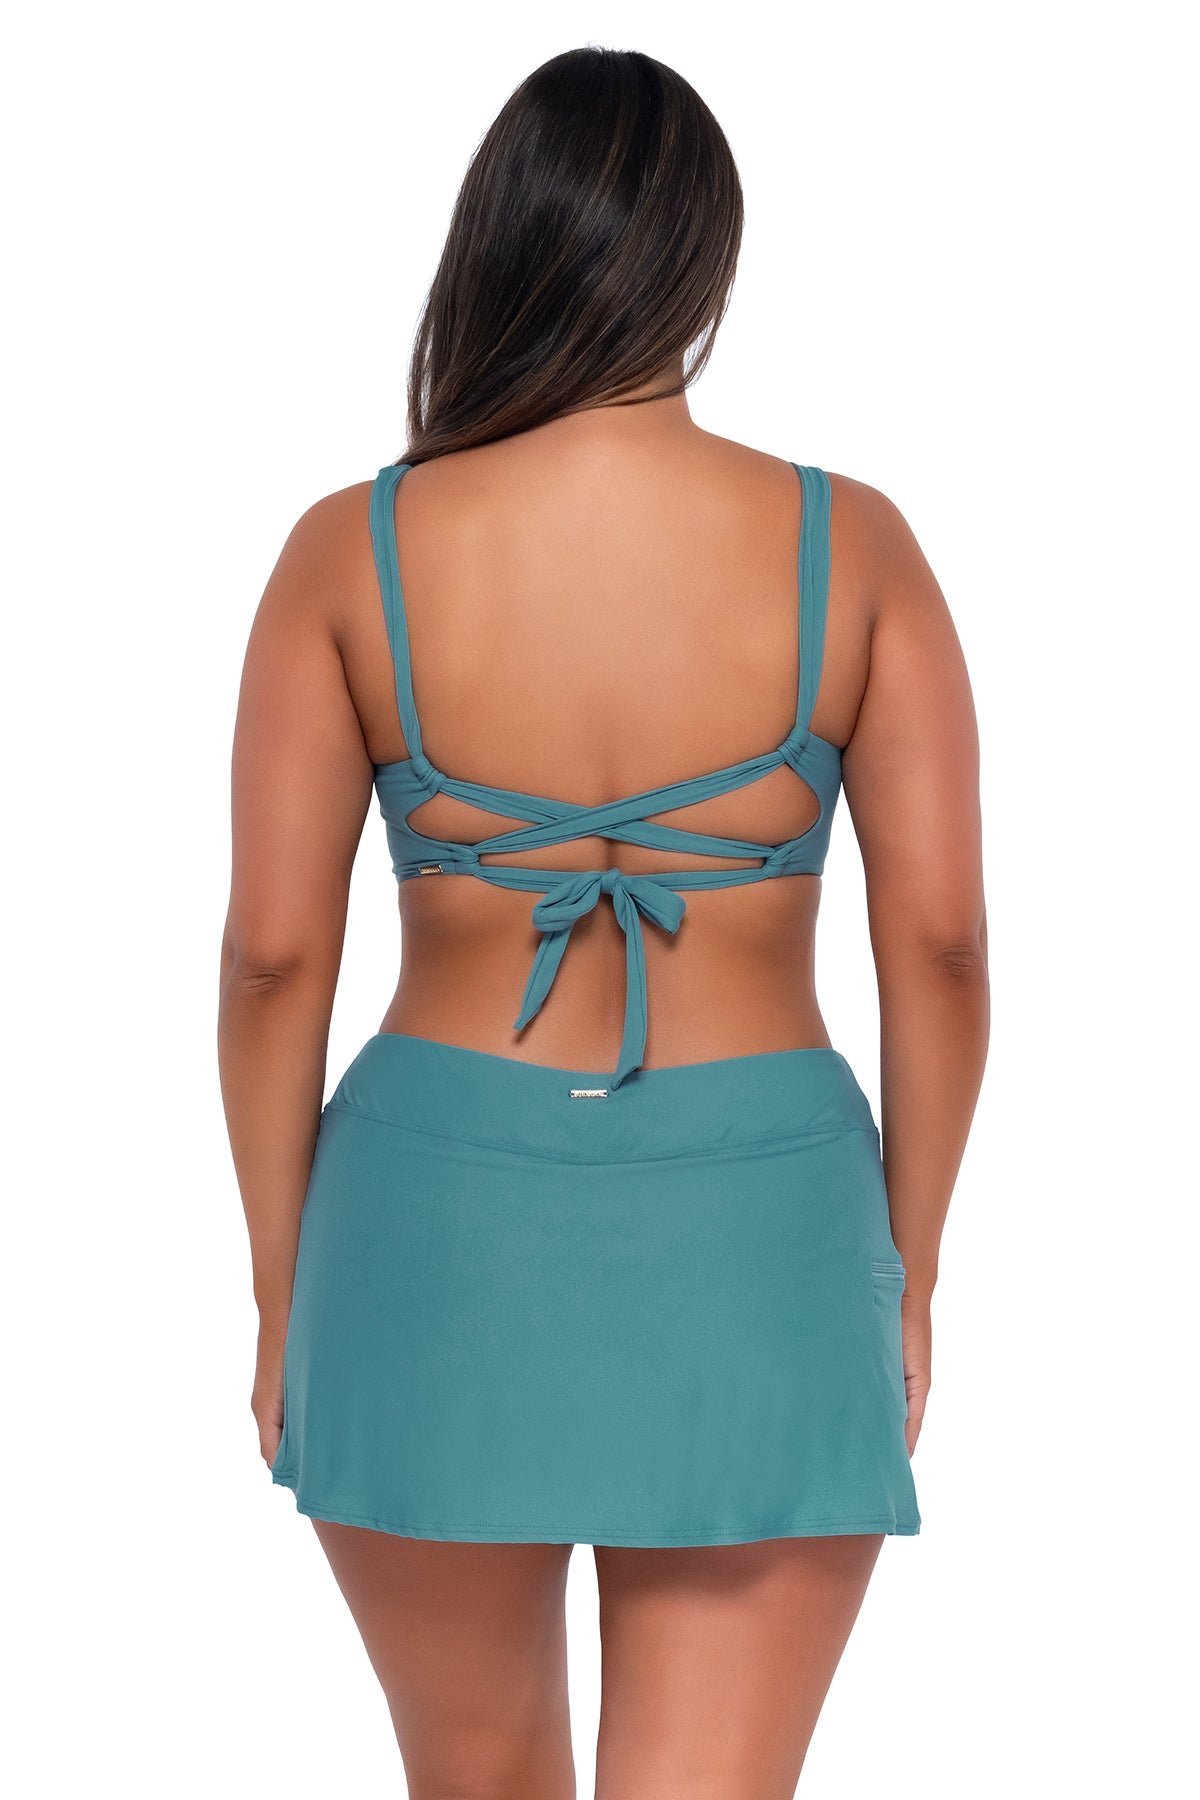 Back pose #1 of Taylor wearing Sunsets Ocean Sporty Swim Skirt with matching Elsie Top underwire bikini